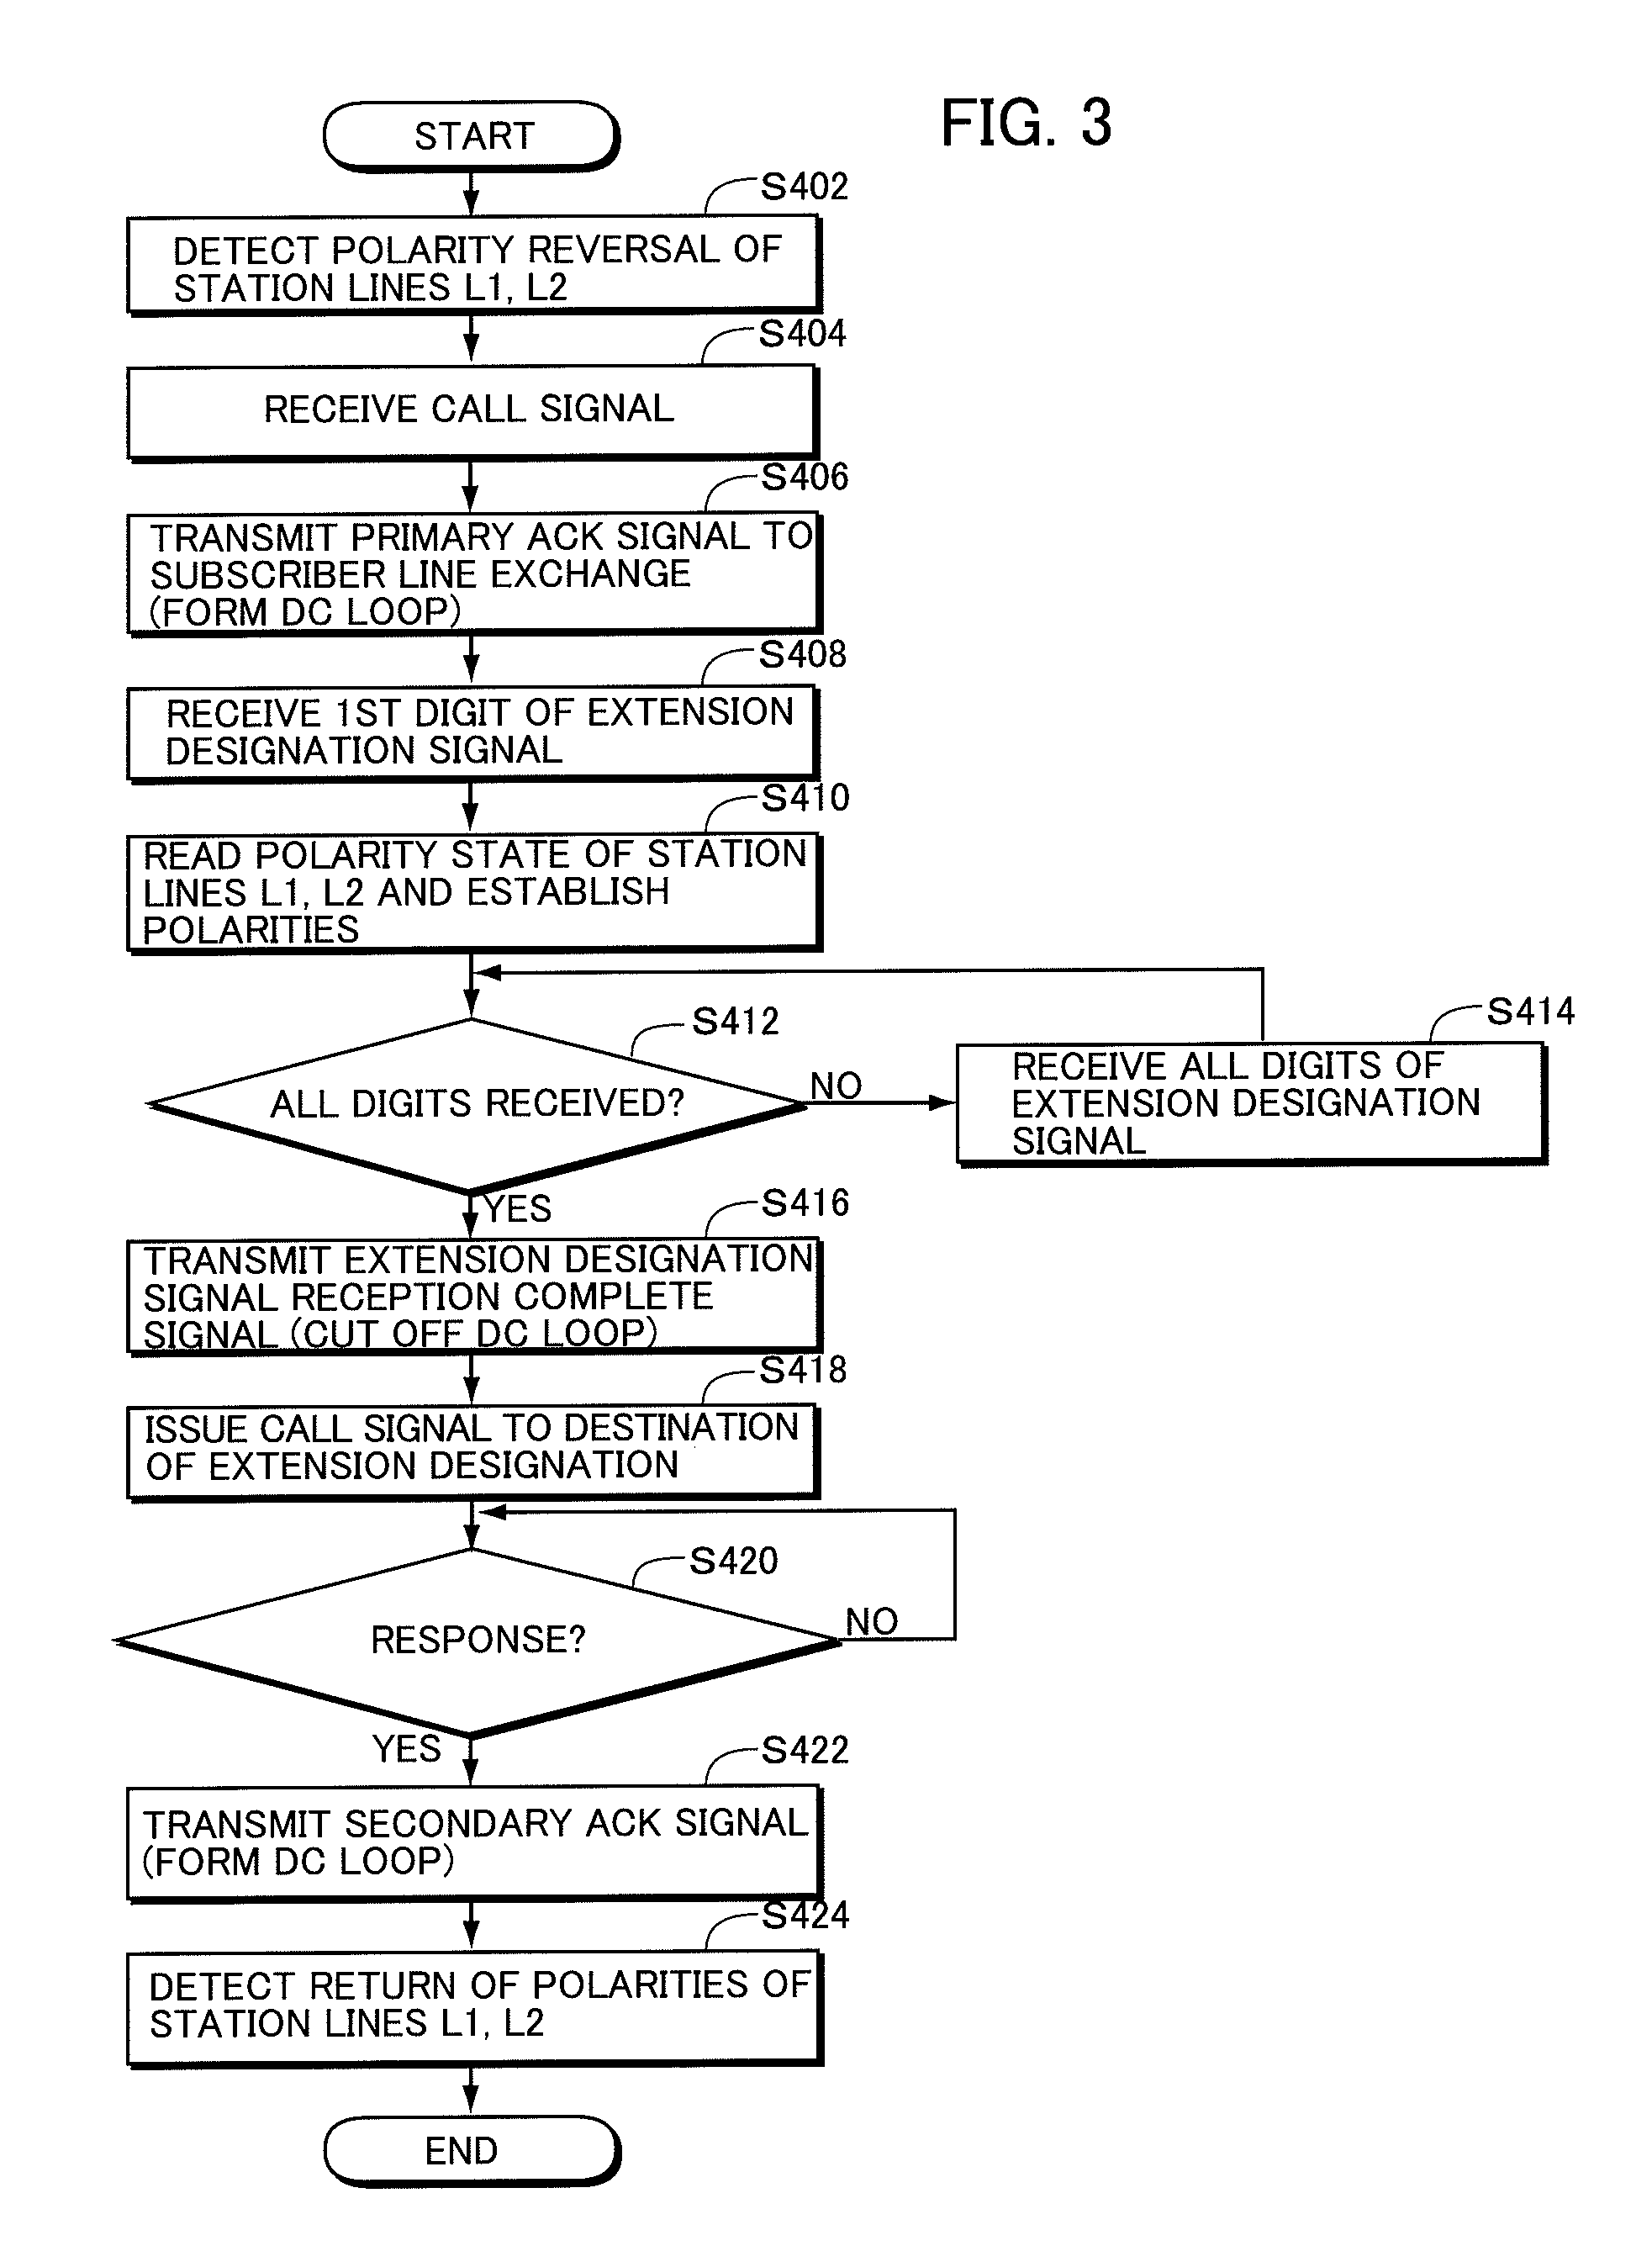 Communication terminal adapted to direct dial-in service and method of establishing polarity